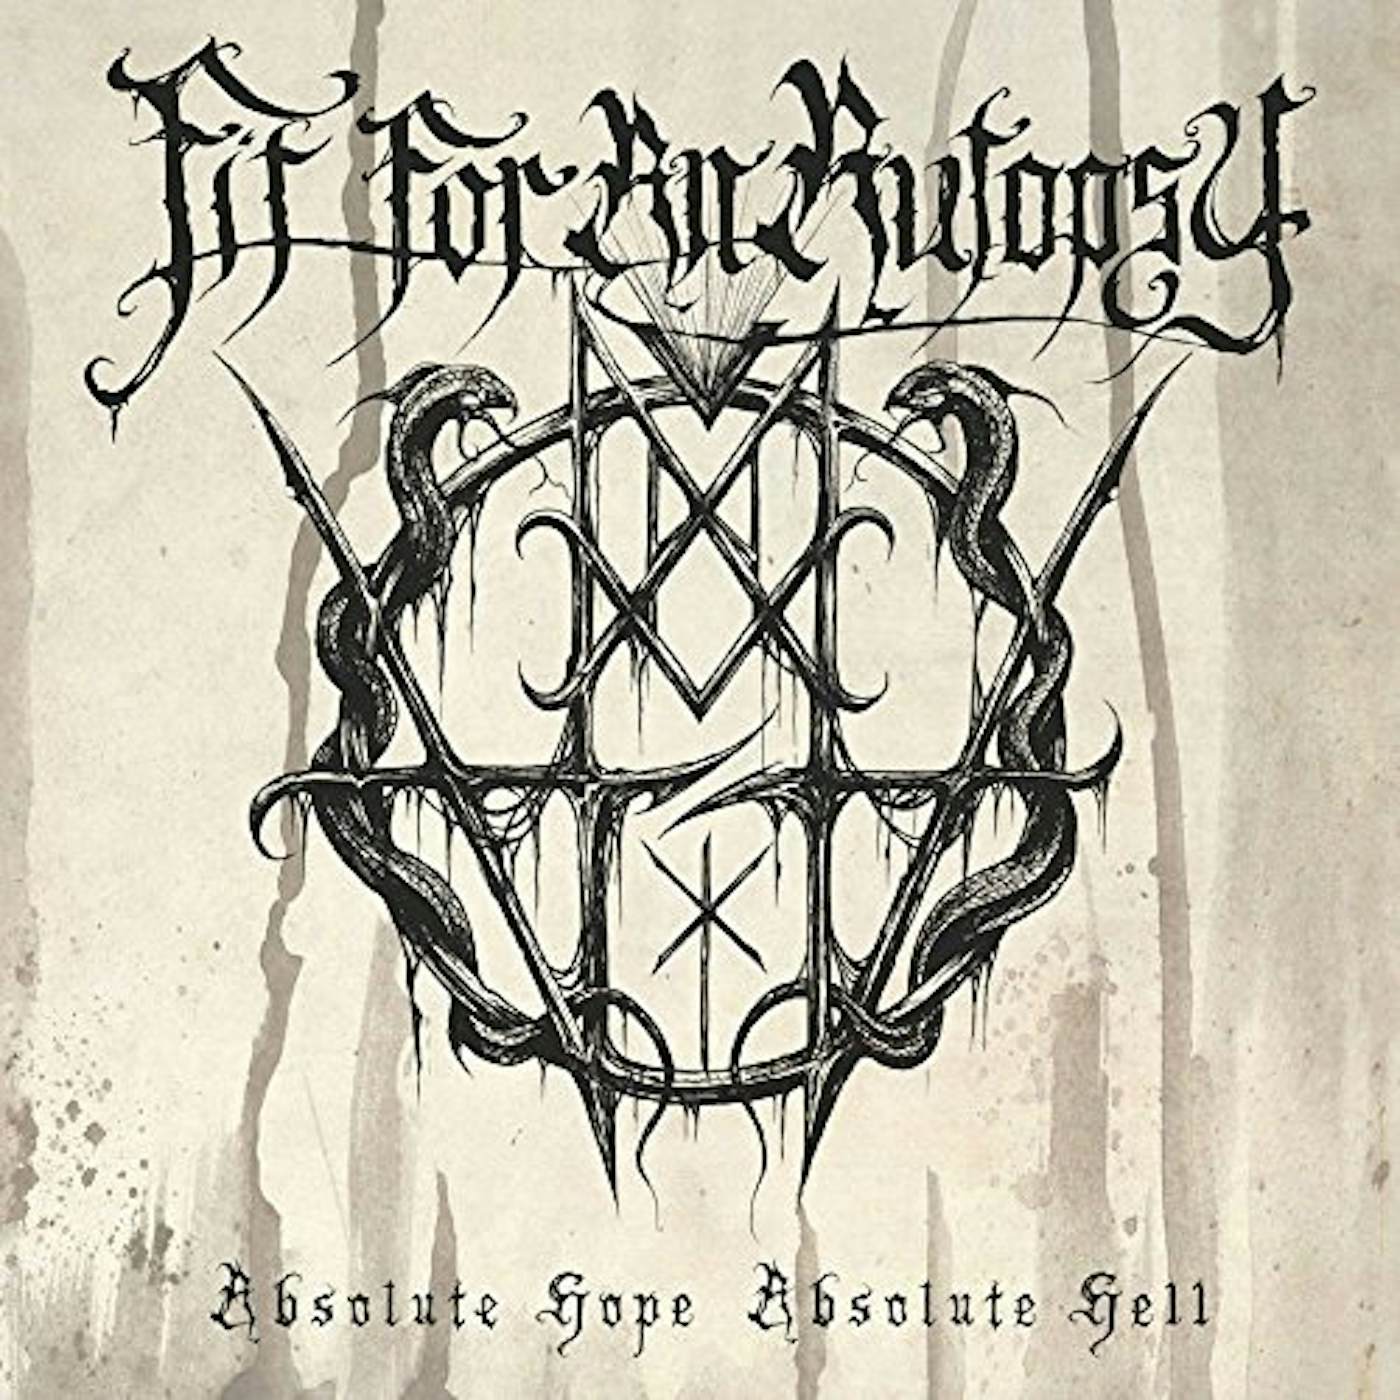 Fit For An Autopsy ABSOLUTE HOPE ABSOLUTE HELL CD